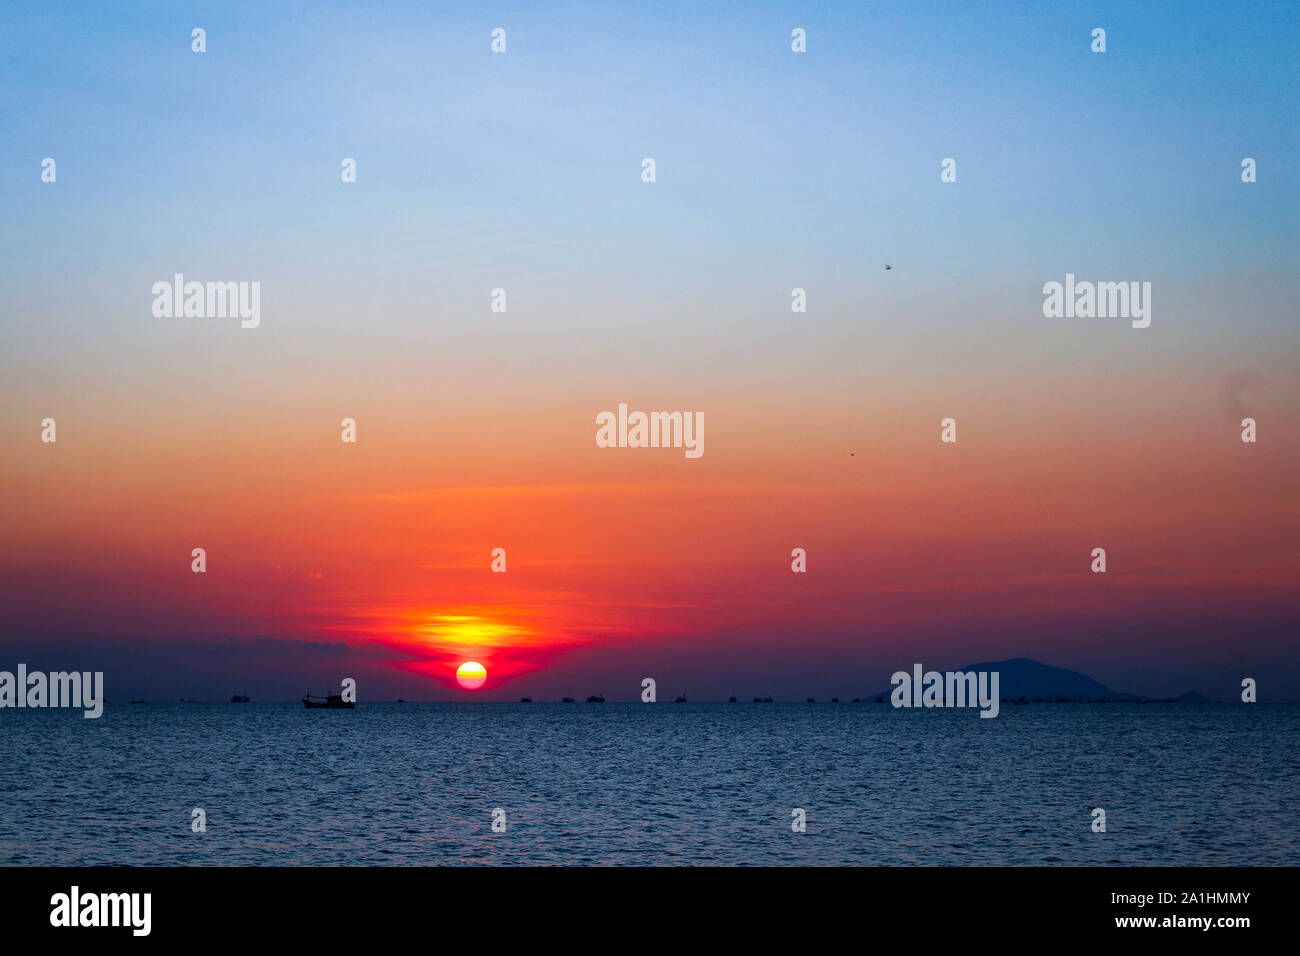 Turtle island sun set time photographed in Rach Gia, Kien Giang, Viet Nam Stock Photo